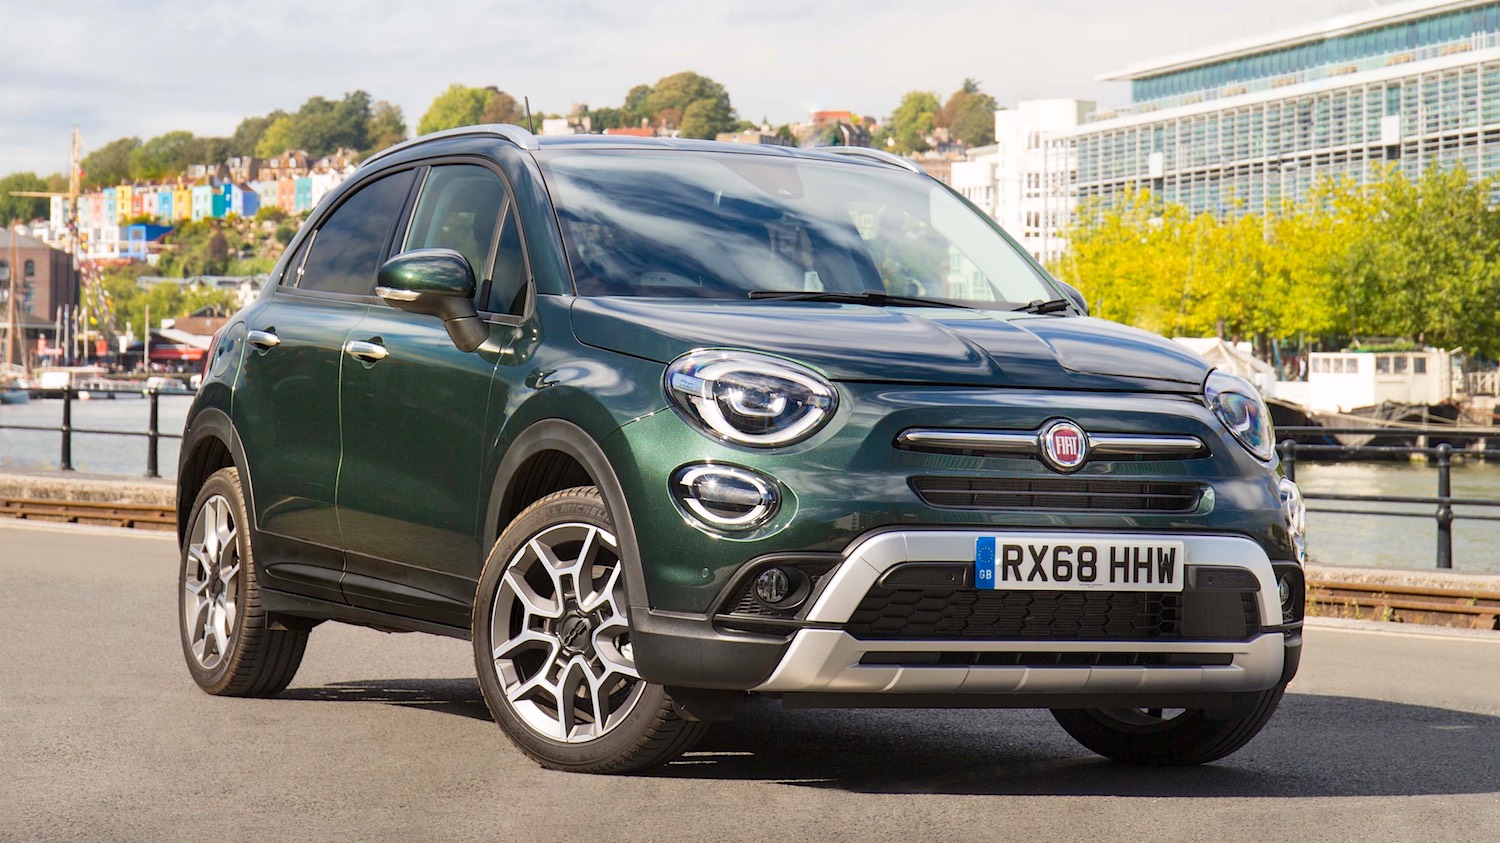 Drive.co.uk Reviewed the 2019 New Fiat 500X new look